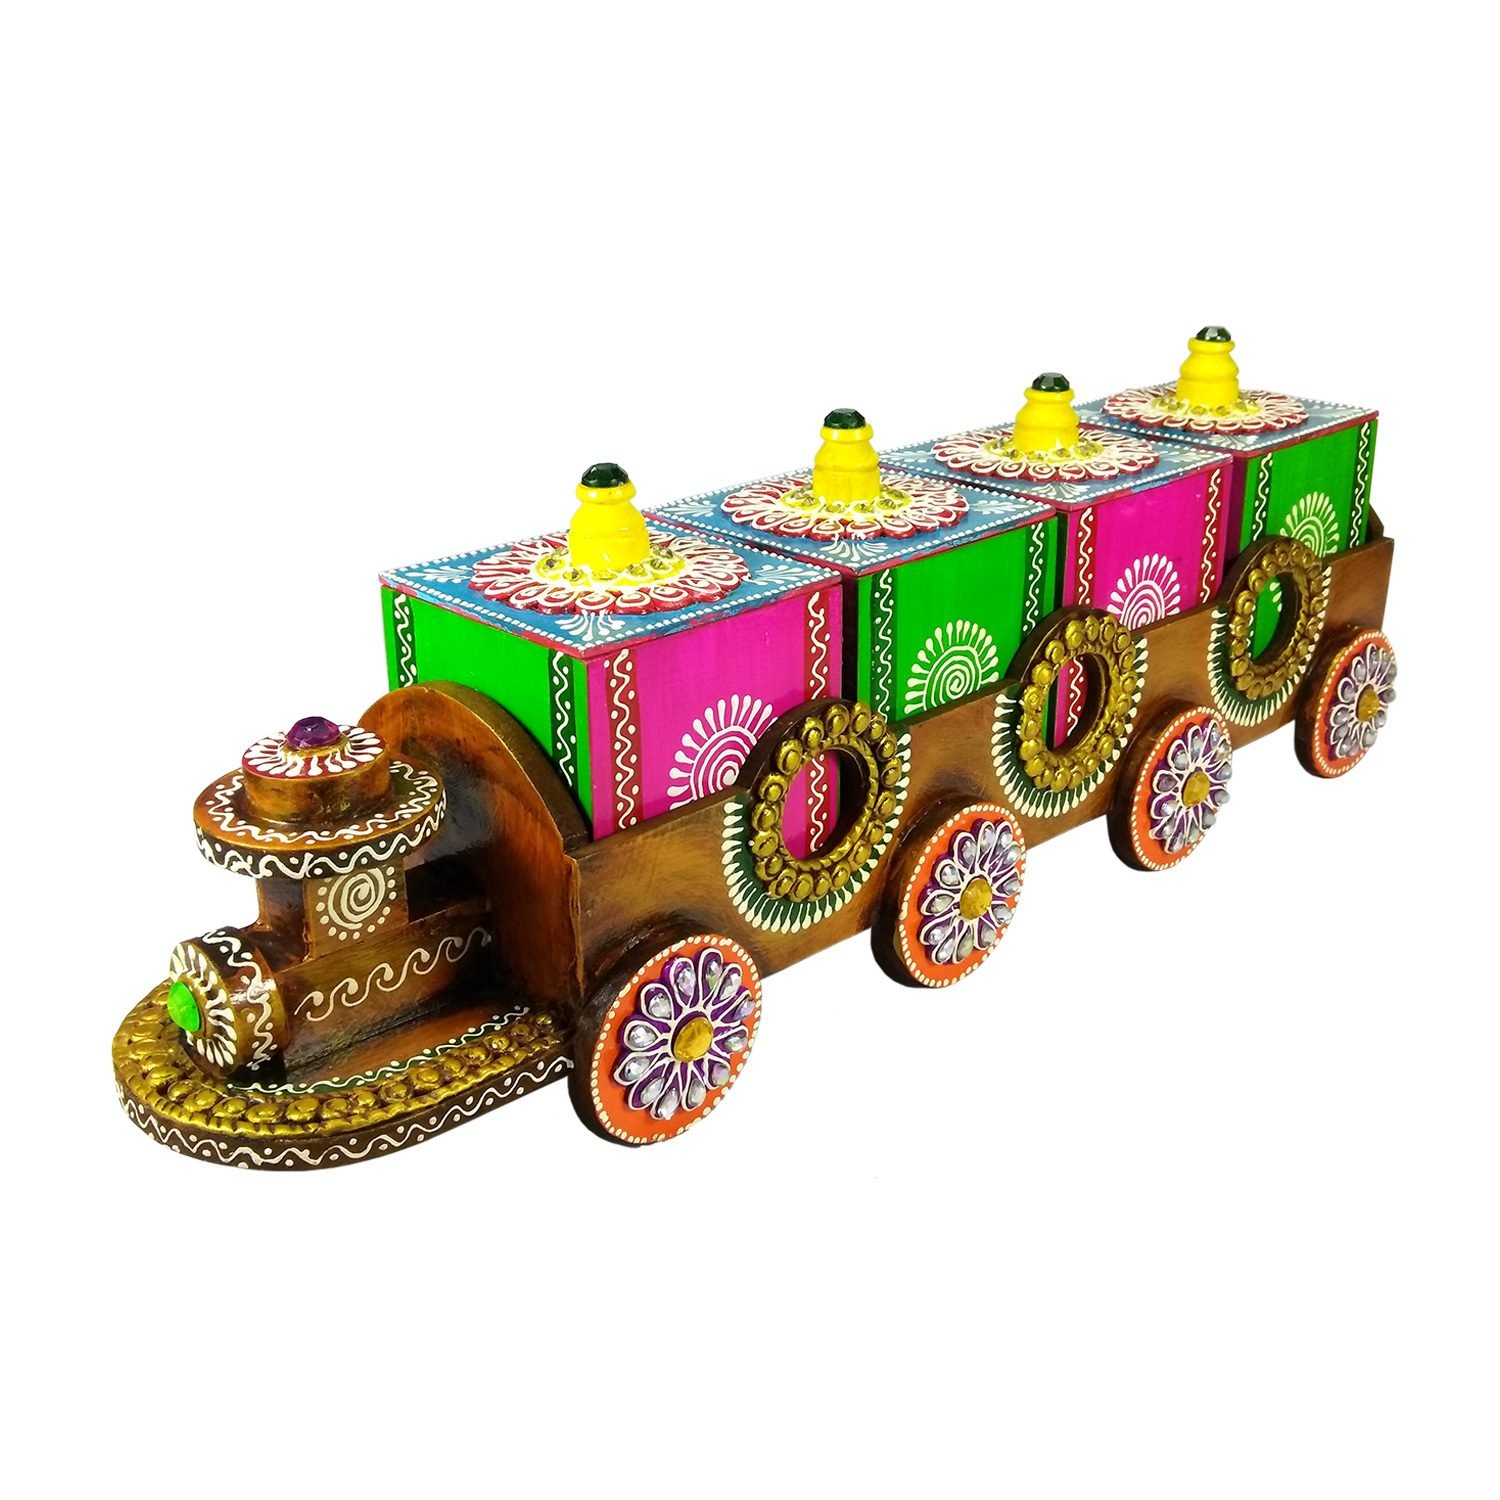 Wooden Train Dry Fruit Box with 4 spacious containers